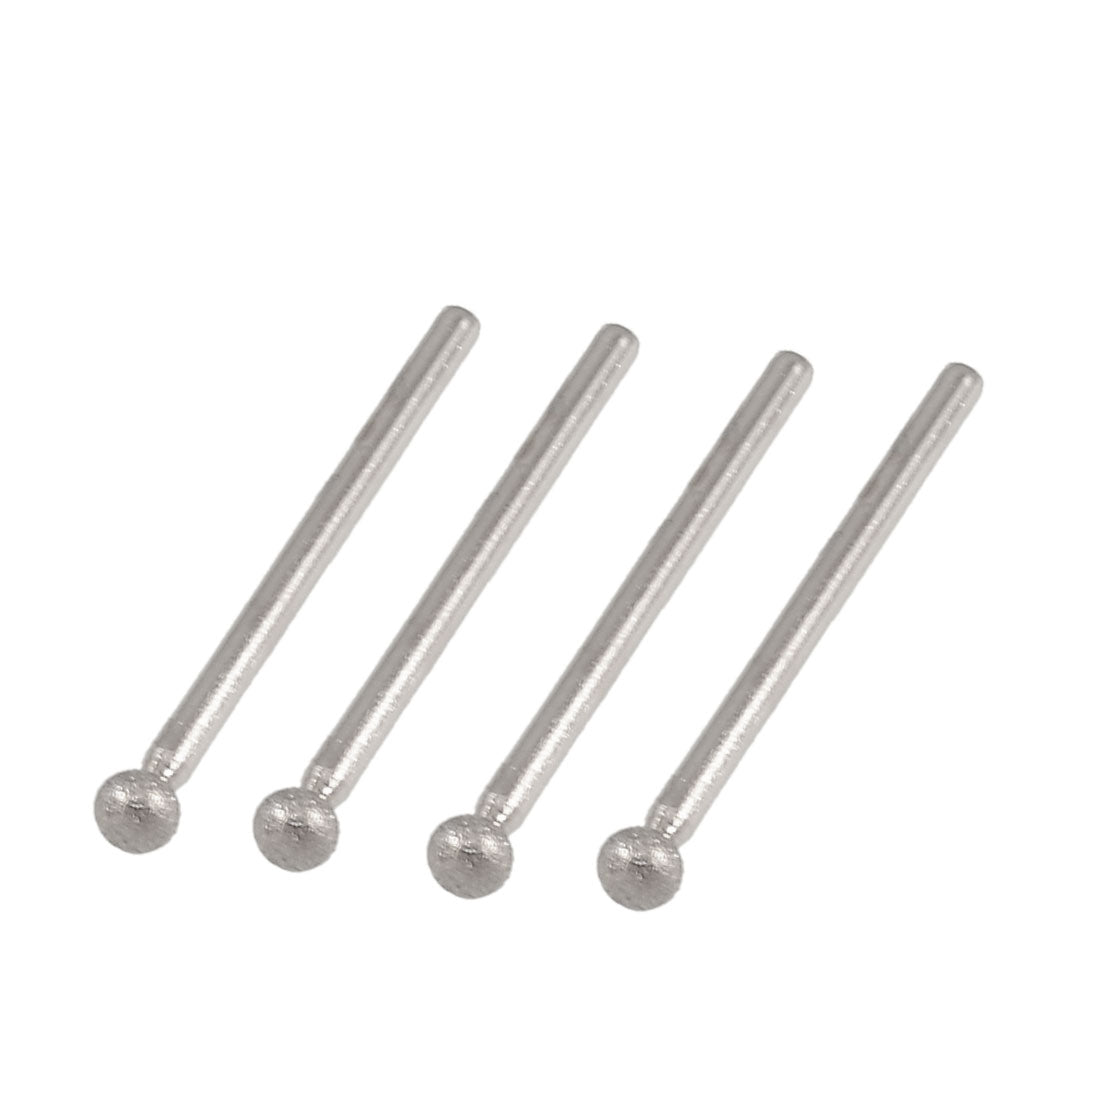 uxcell Uxcell 4 Pcs 5mm Ball Nose 3mm Shank Diamond Mounted Point Grinding Bits